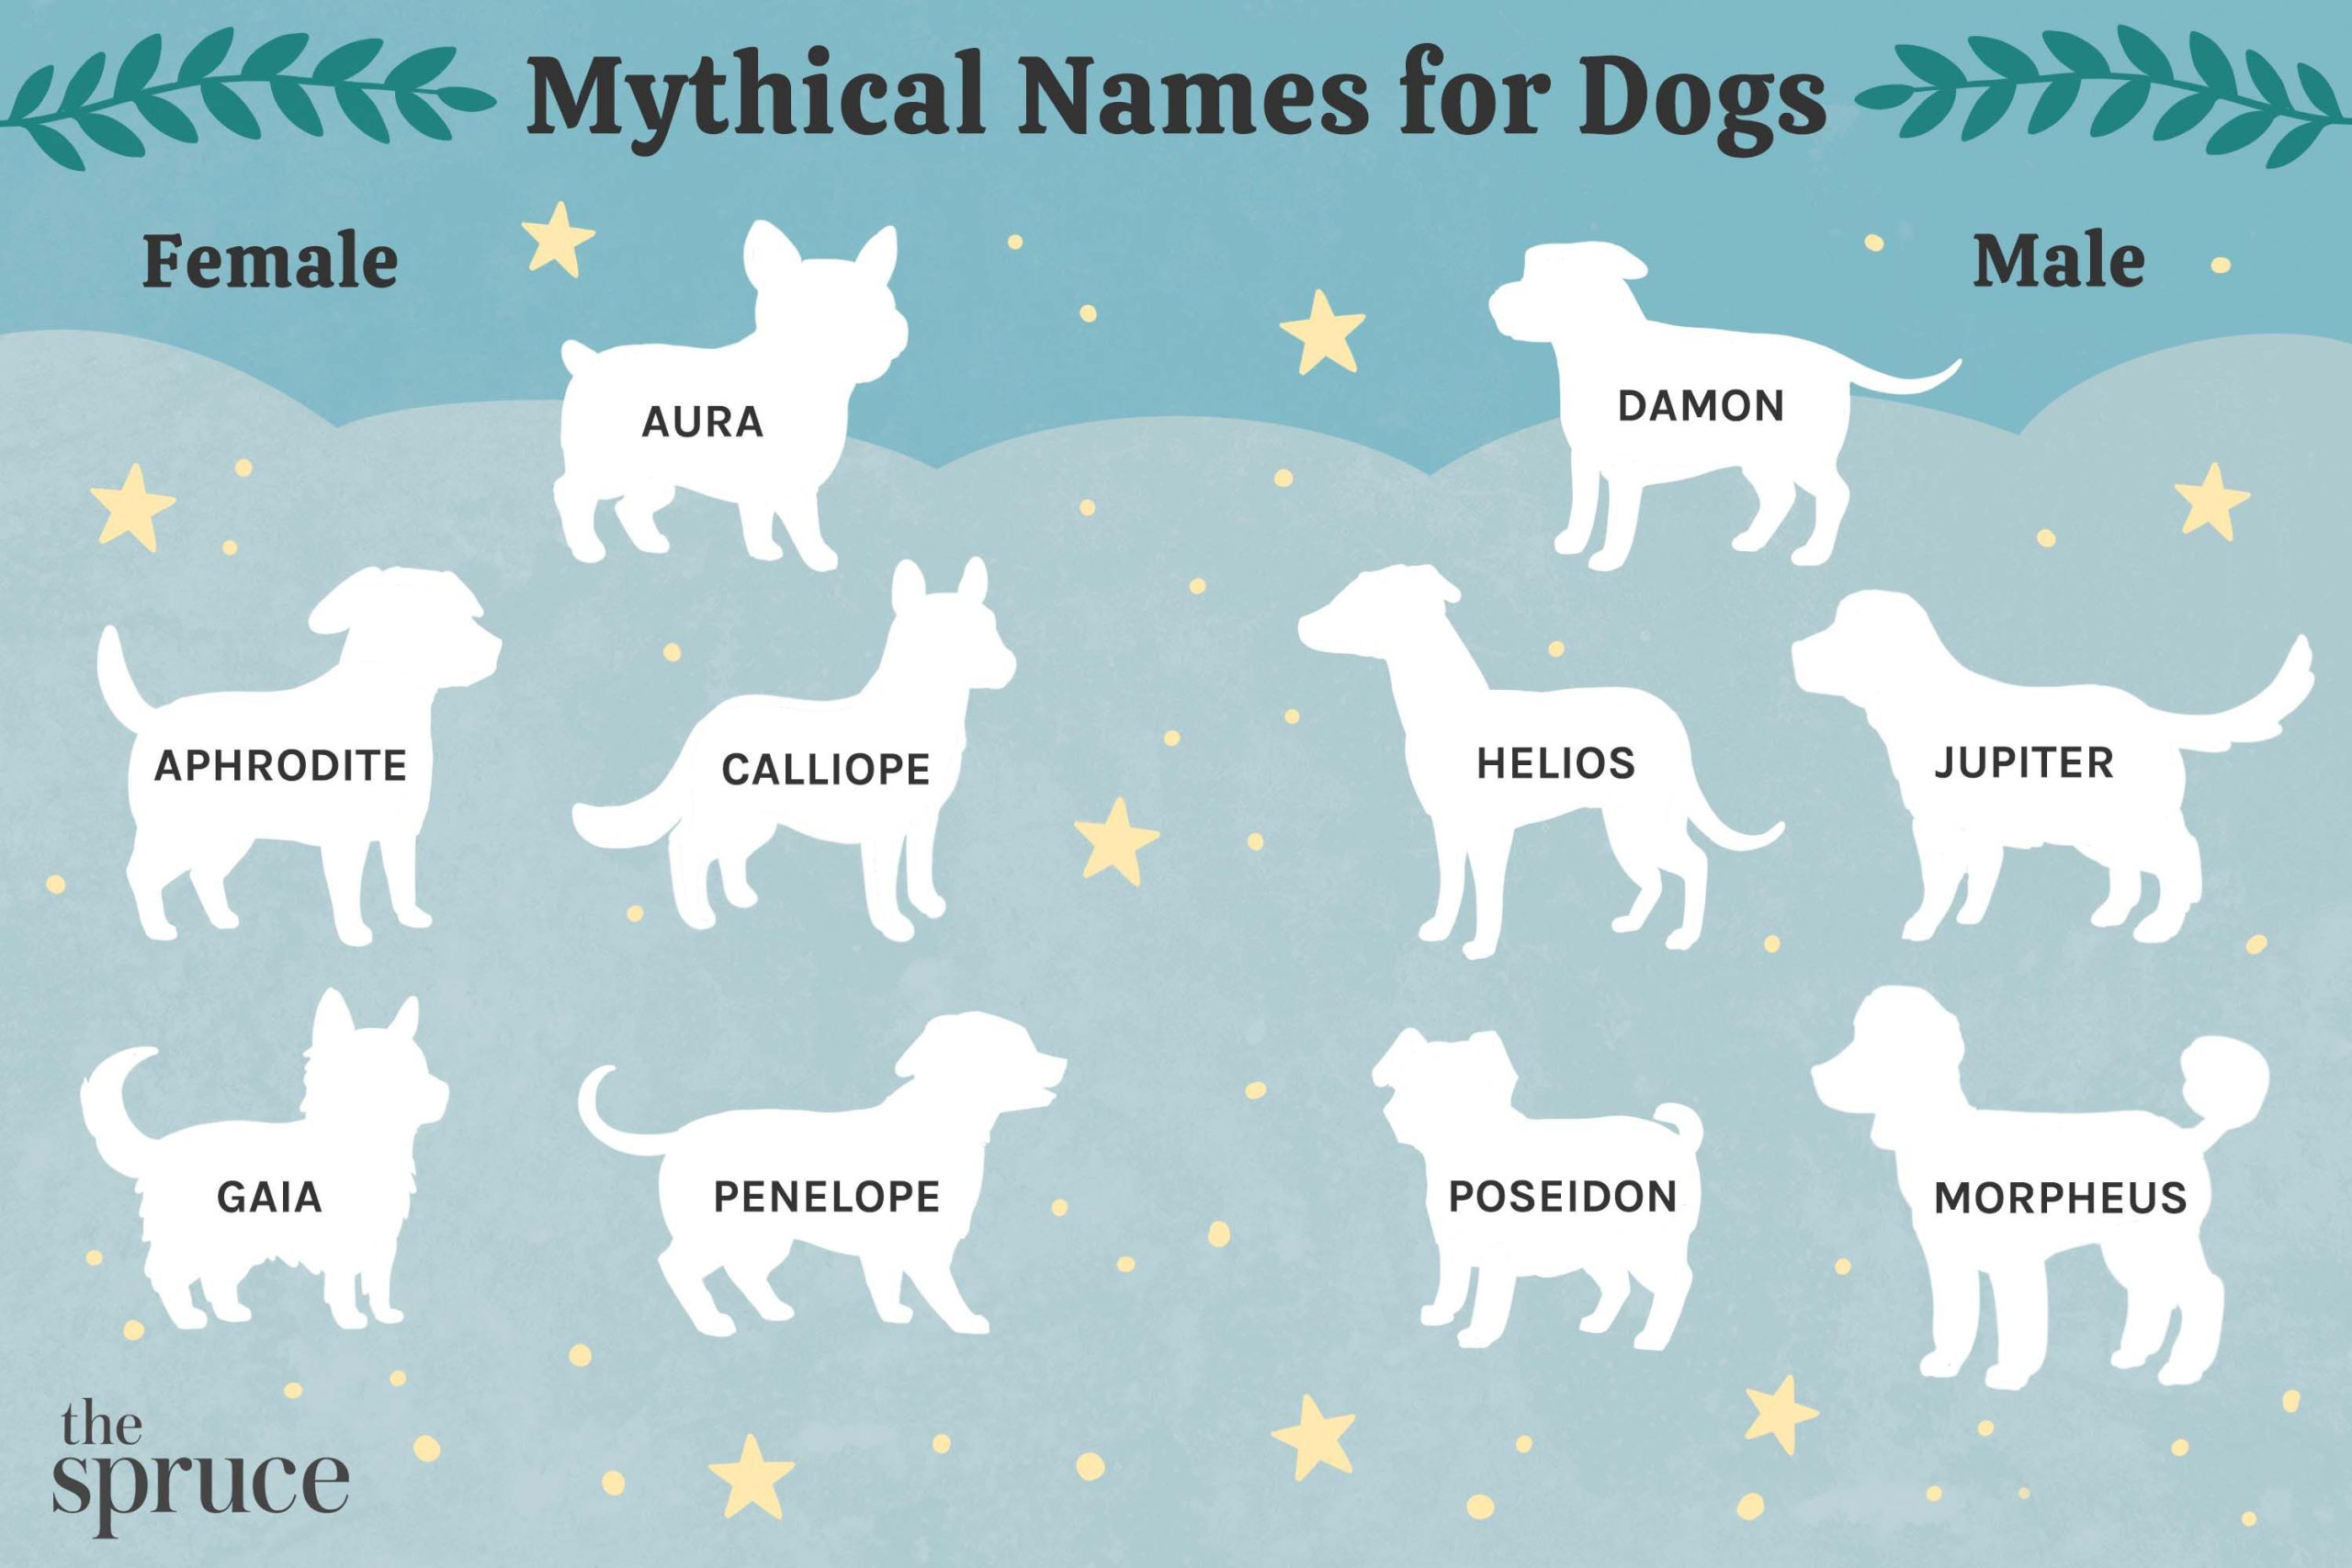 What is a Rare Name For a Female Dog?